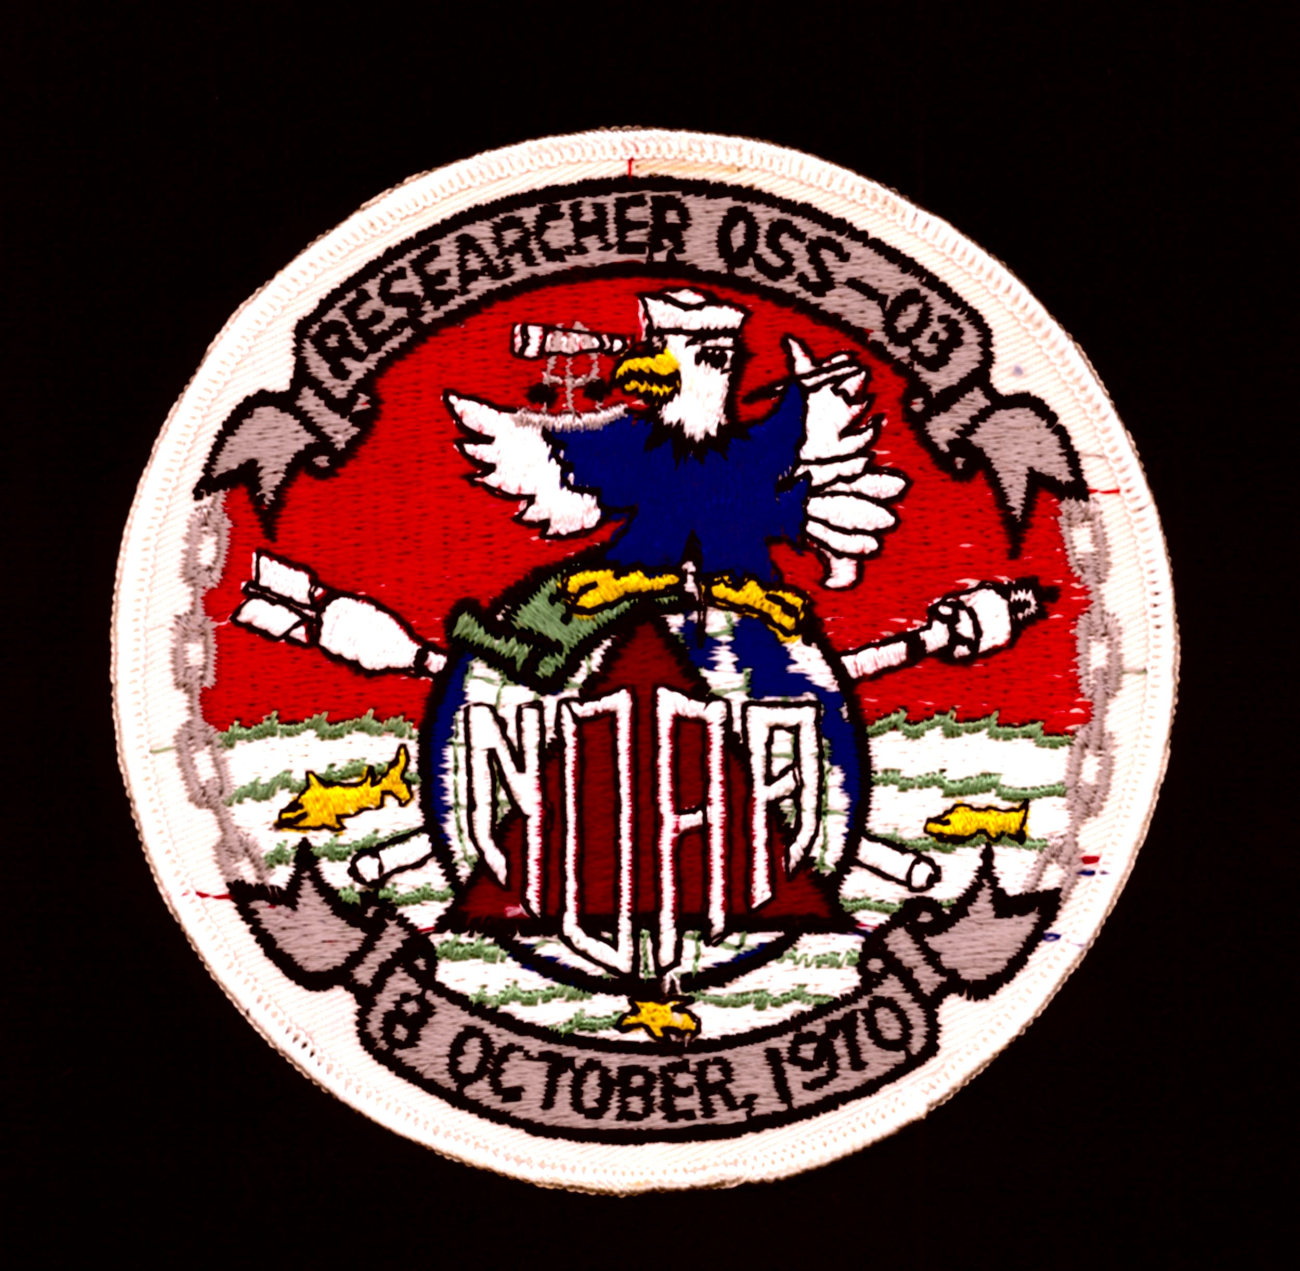 NOAA Ship RESEARCHER patch commemorating formation of NOAA